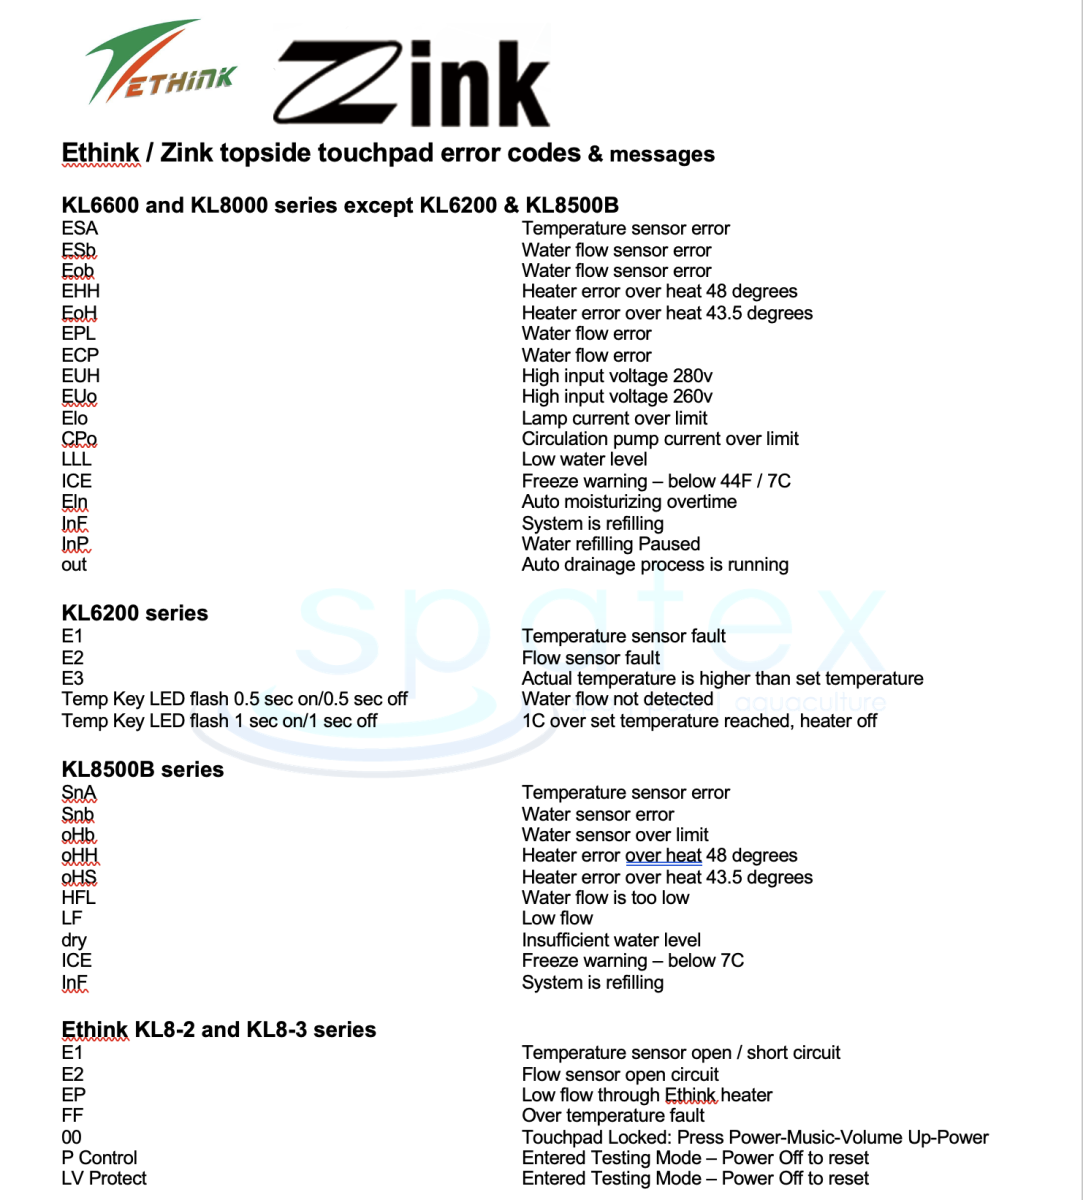 EThink Zink spa topside touchpad error fault codes and messages